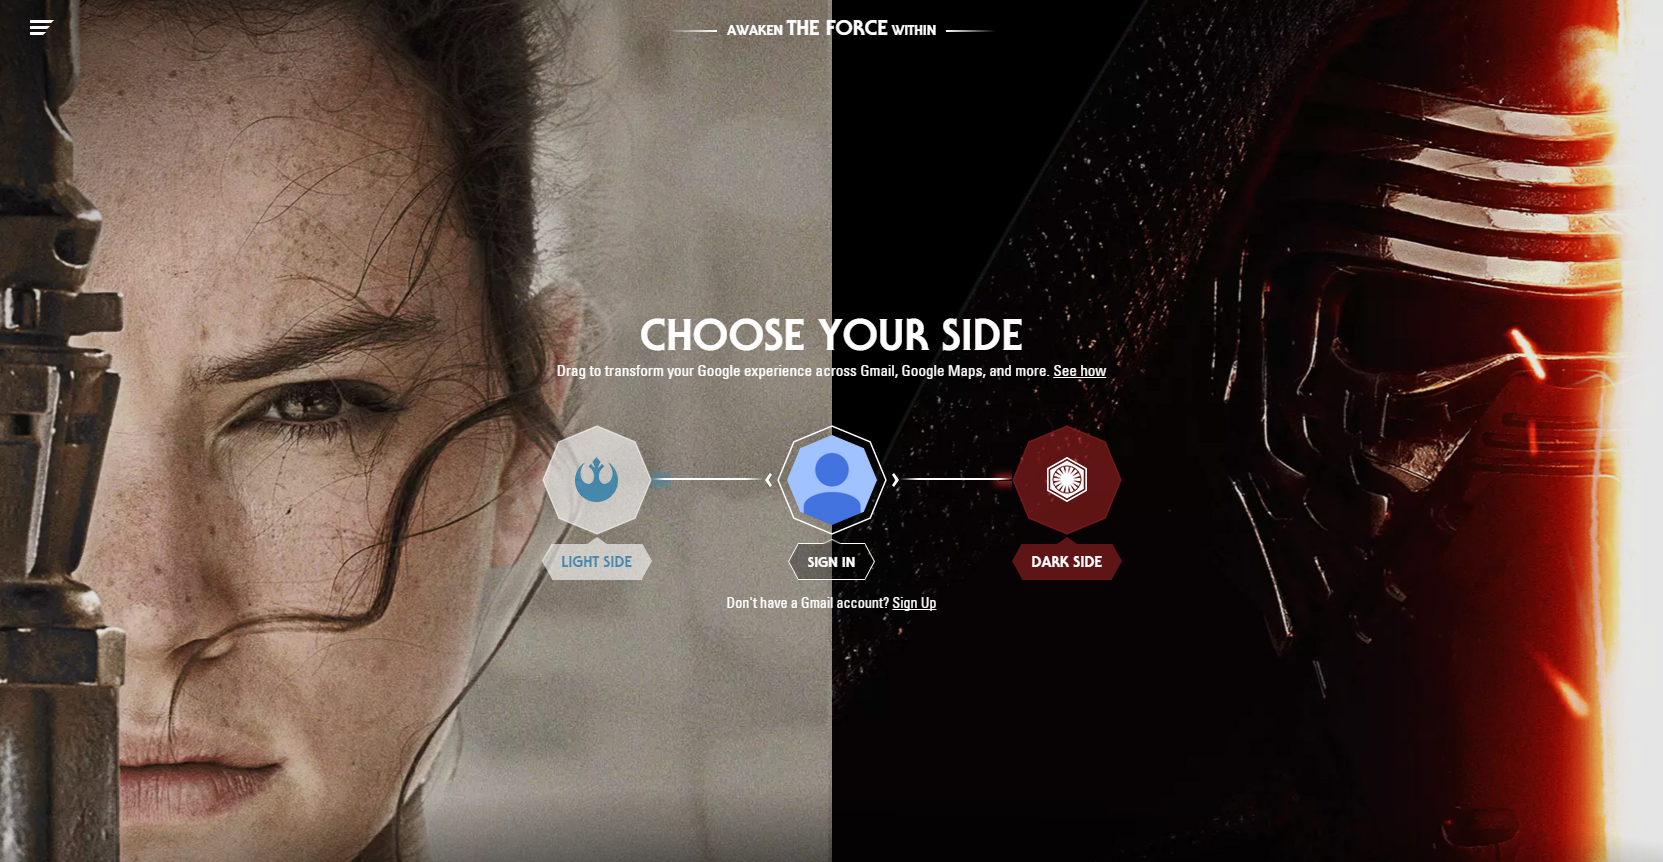 Google Adds ‘Star Wars’ Pizzazz to Apps & Devices